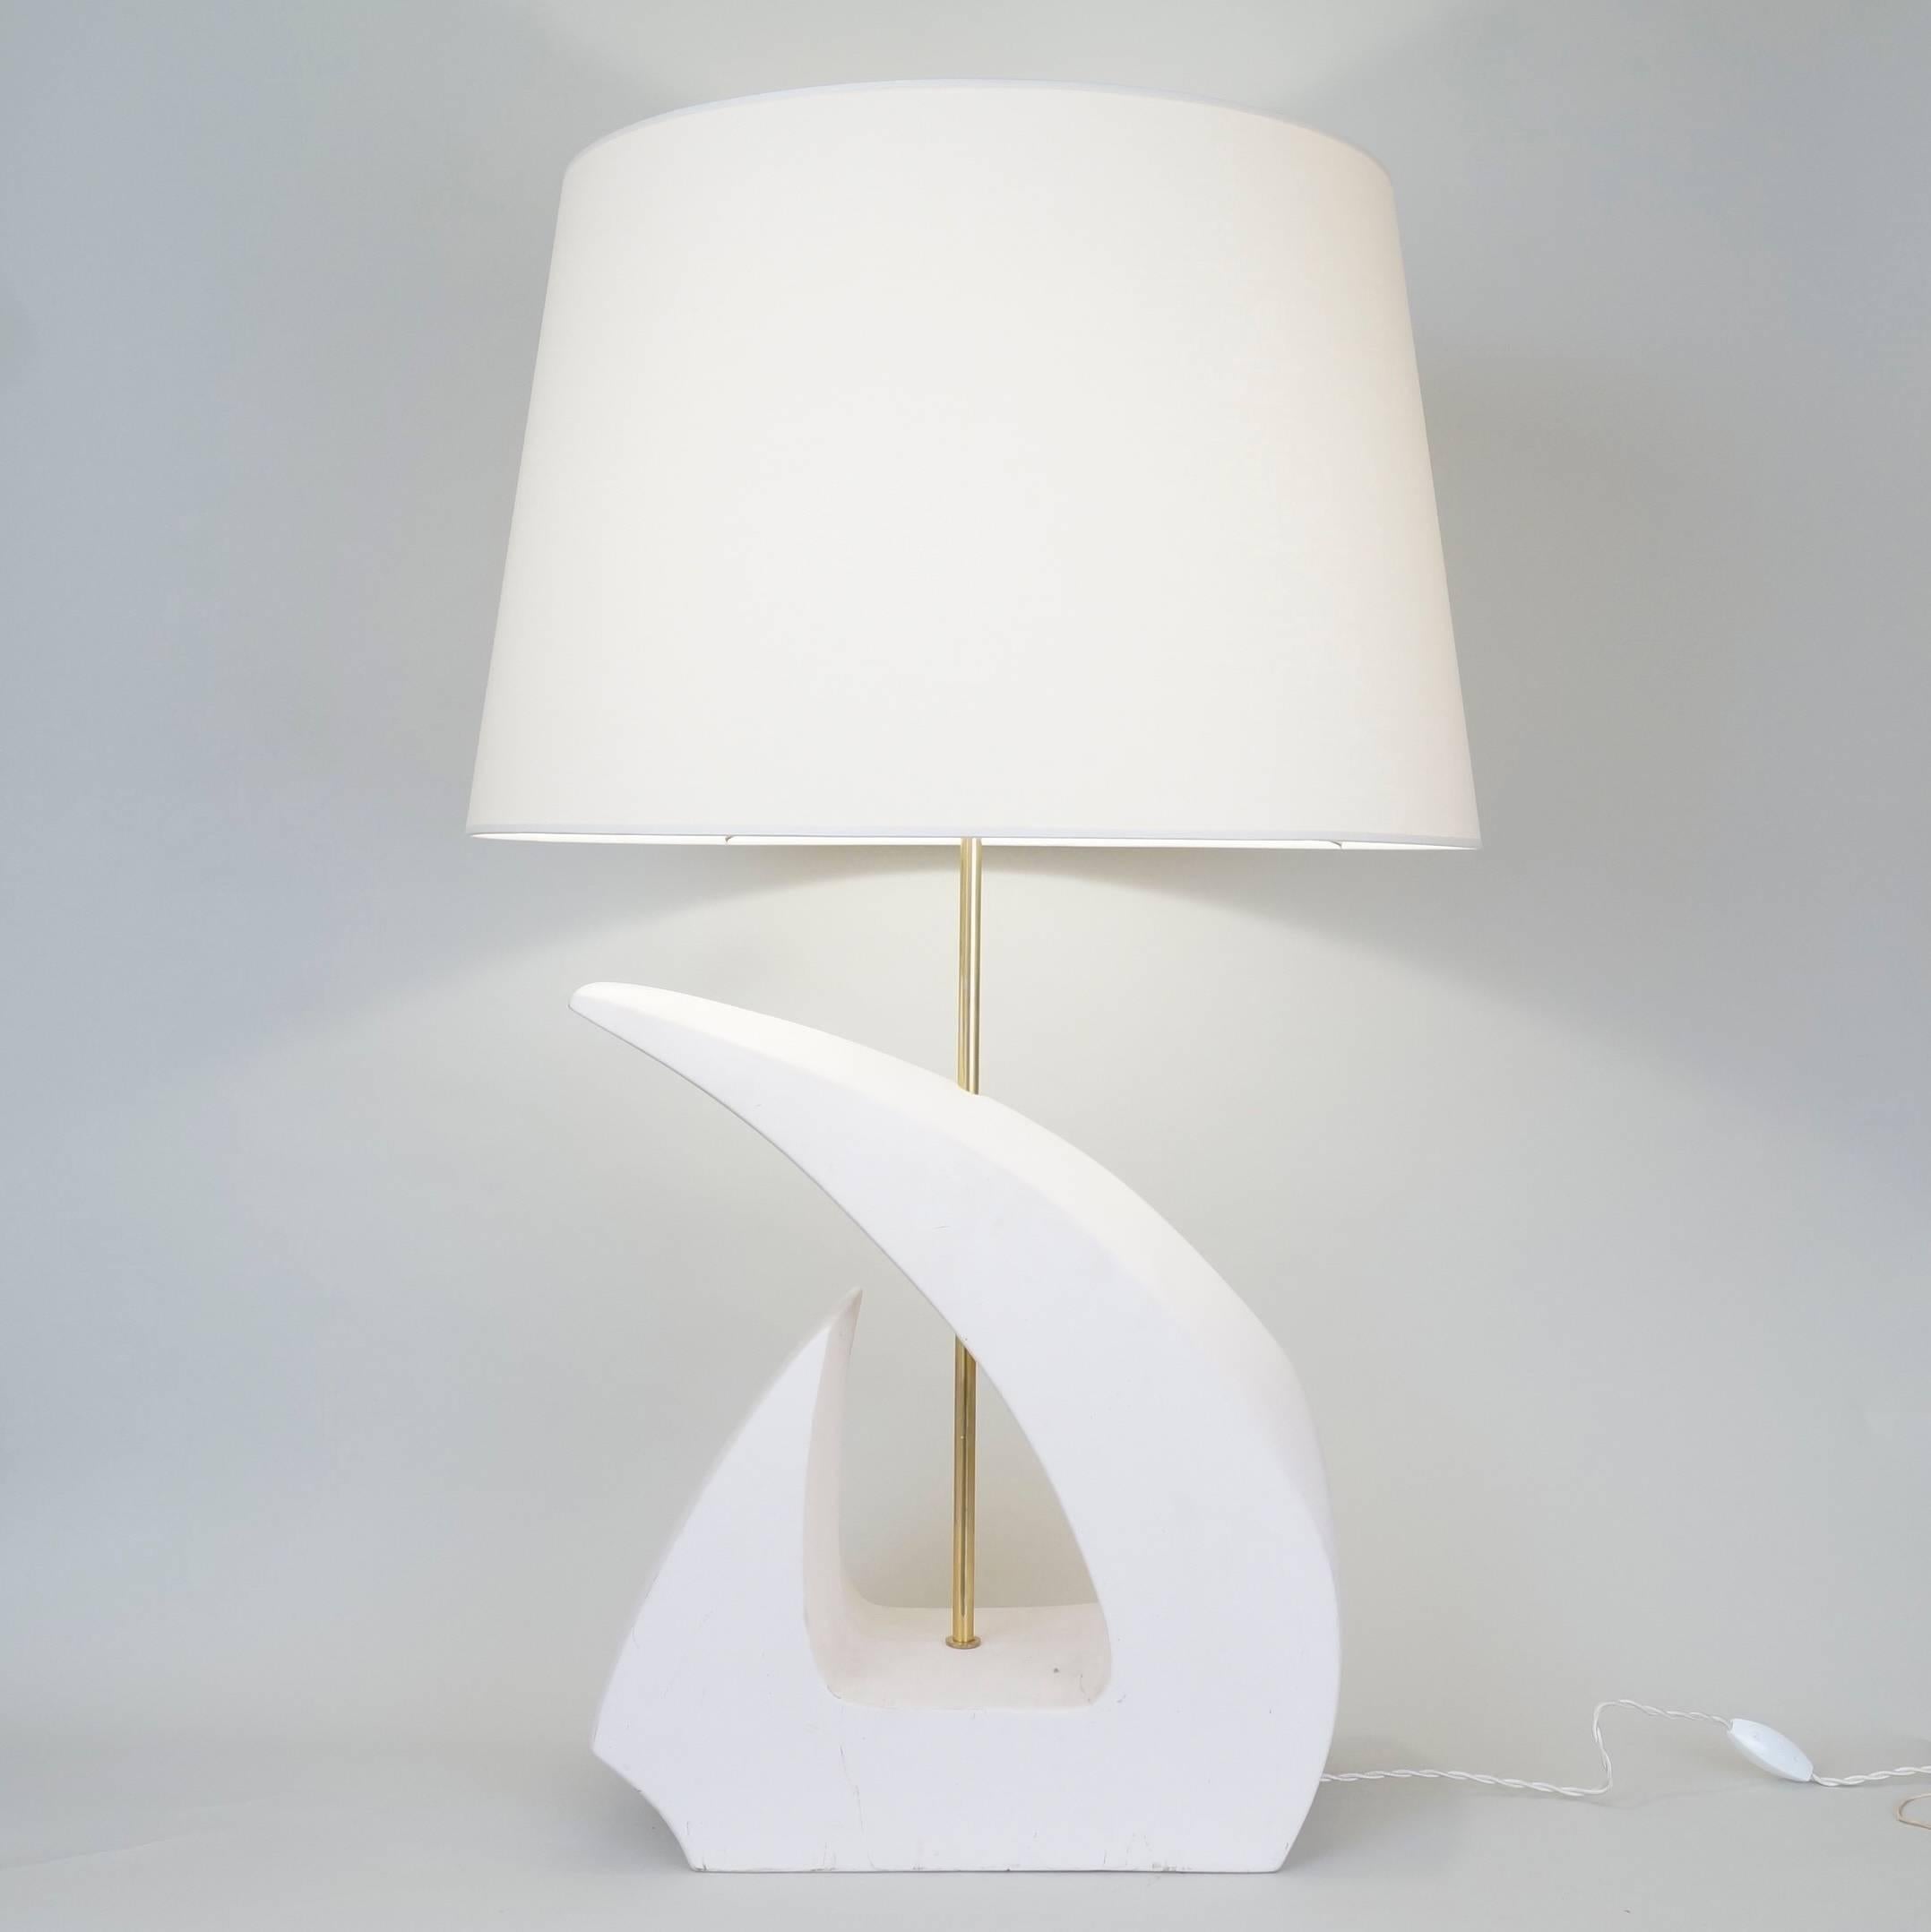 Un-enameled white ceramic table lamp, signed on the side Dorion, ceramic factory of Desvres, custom-made fabric lampshade, rewired with twisted silk cord.
US standard plug on request.
Measure: Ceramic body height 47 cm, 18.5 in.
Height with